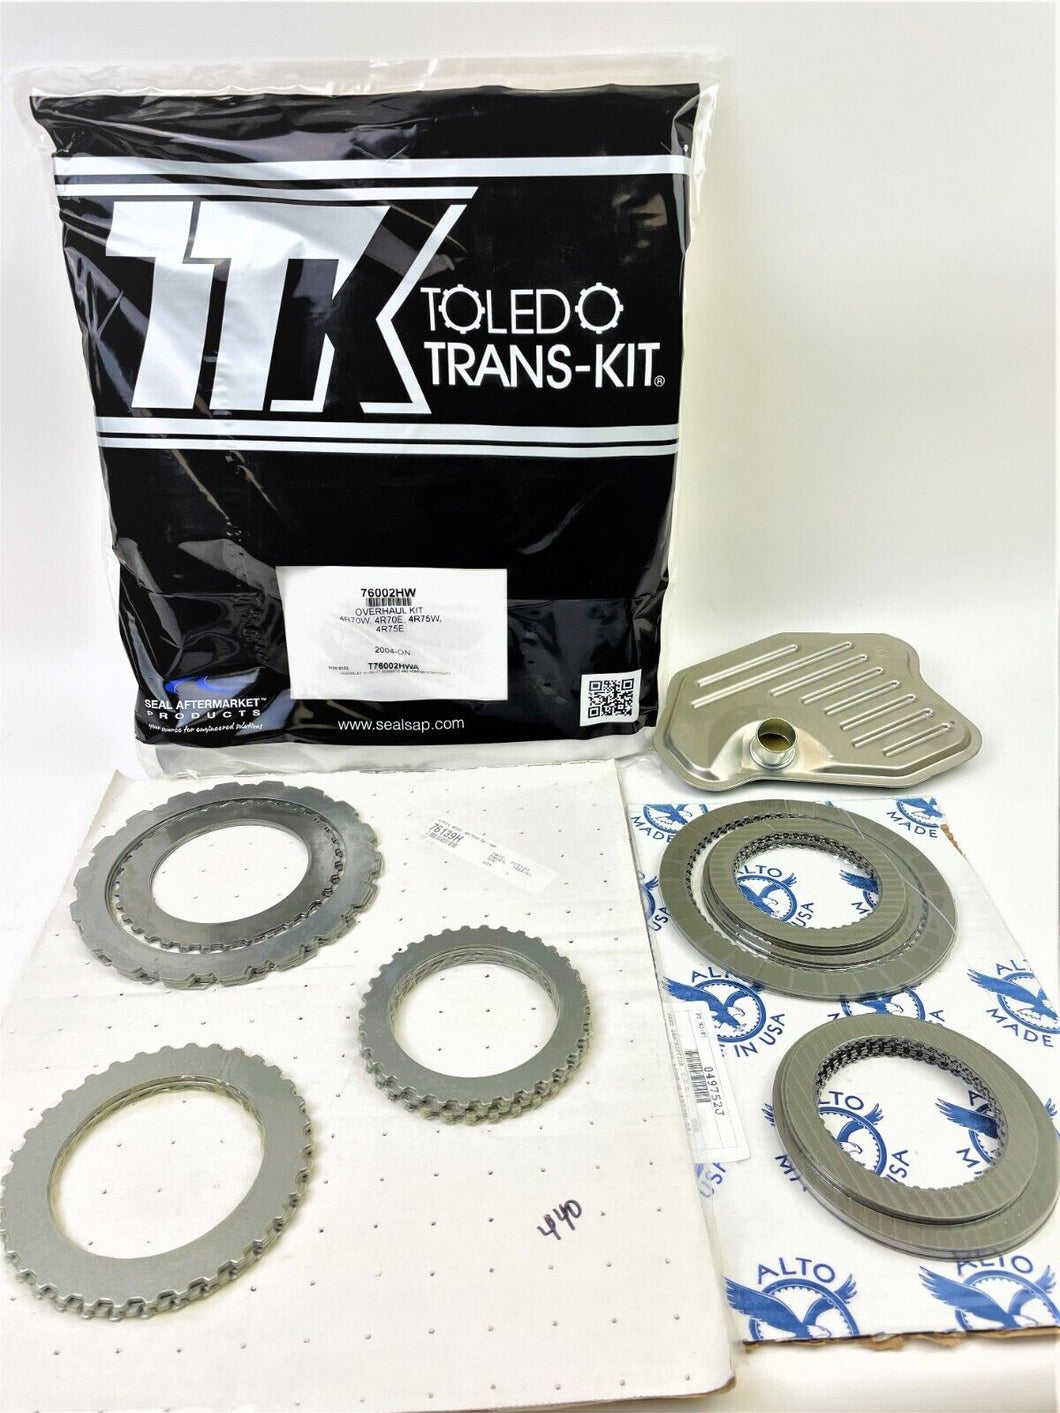 4R70W 4R75W TRANSMISSION MASTER REBUILD KIT 2004 UP with Alto Clutches Filter